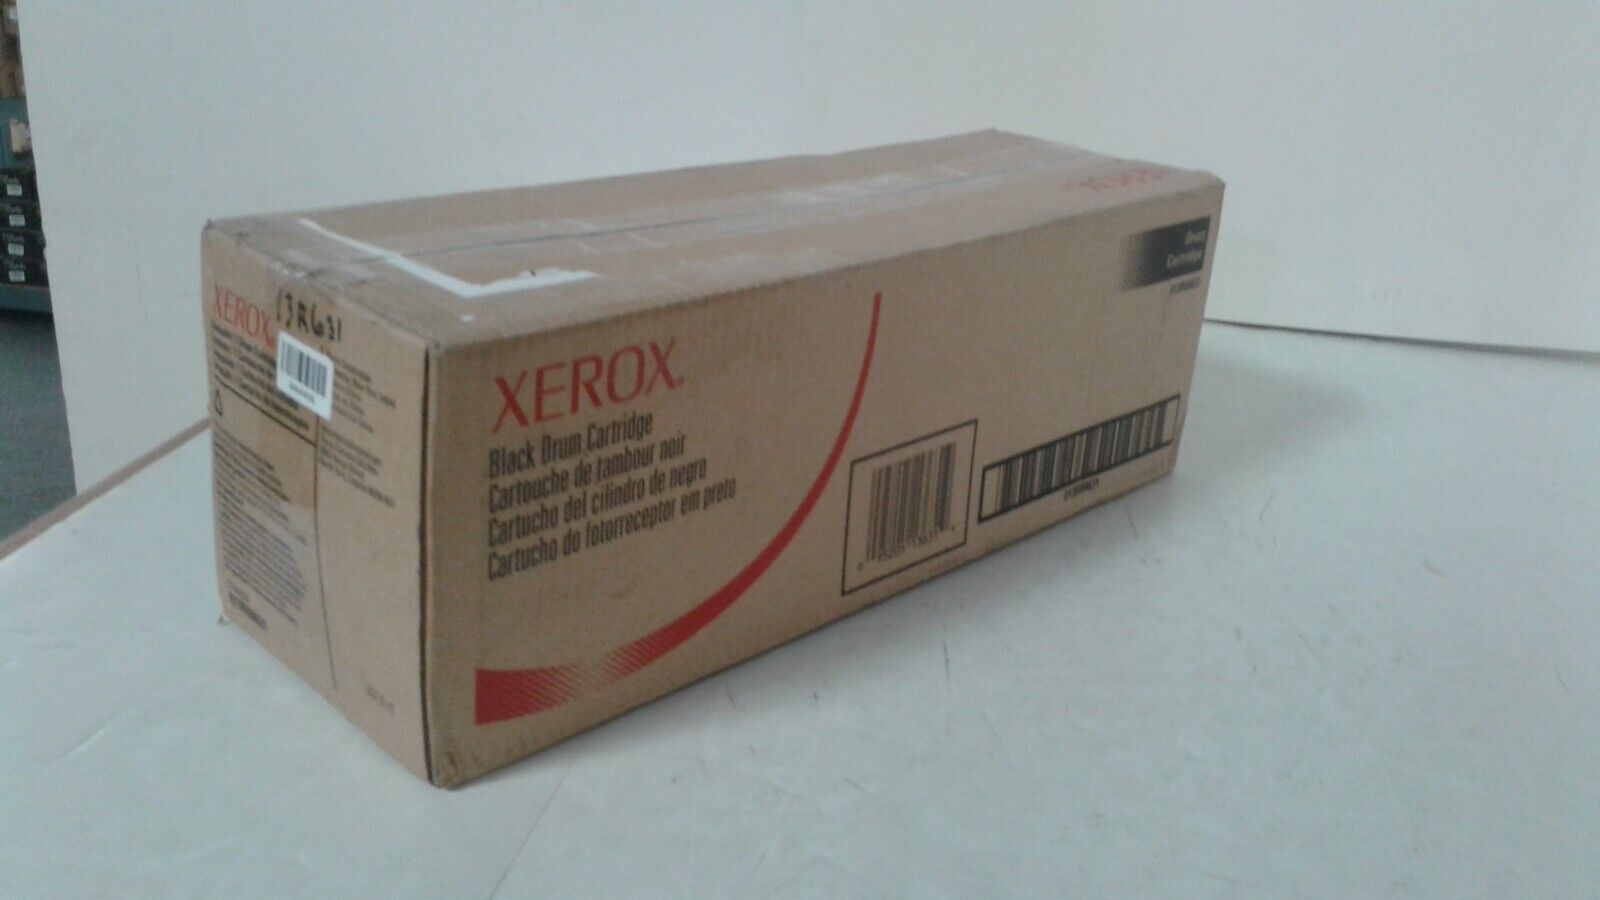 Xerox DocuColor 240 Drum Ctg 013R00631 Black for Xerox WorkCentre 7655/7665/7675